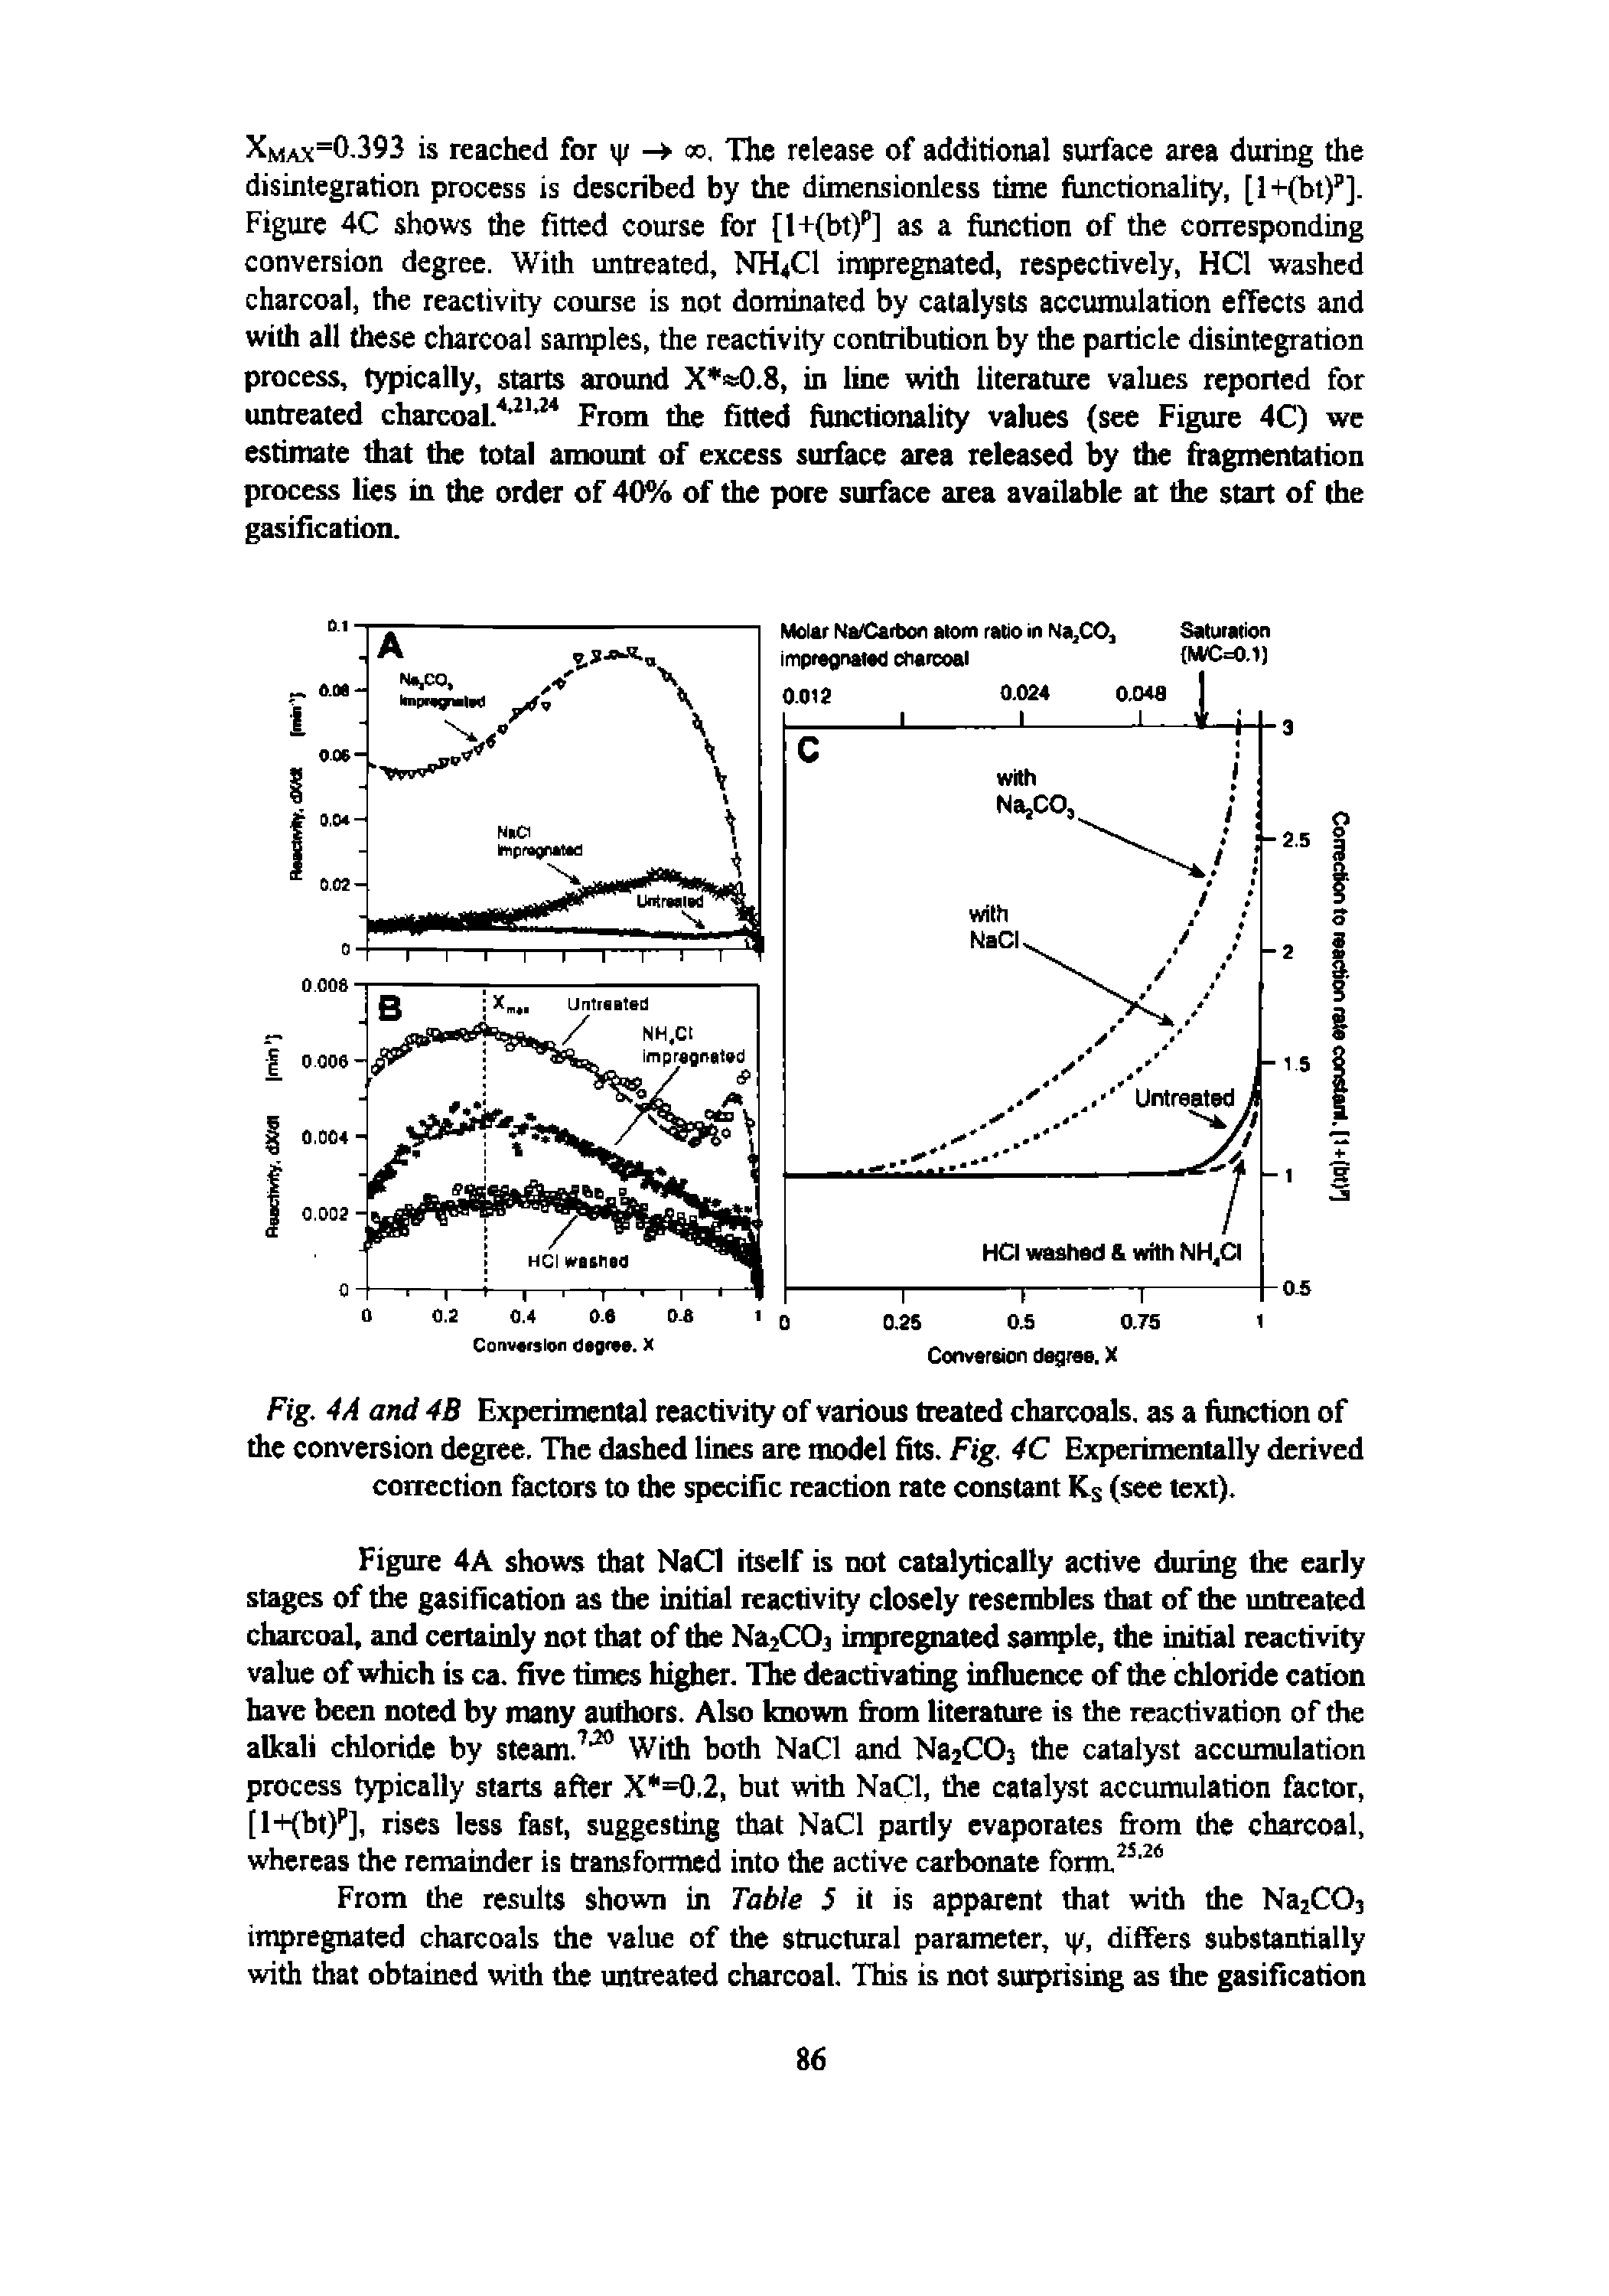 Fig. 4A and 4B Experimental reactivity of various treated charcoals, as a fimction of the conversion degree. The dashed lines are model fits. Fig. 4C Experimentally derived correction factors to the specific reaction rate constant Ks (see text).